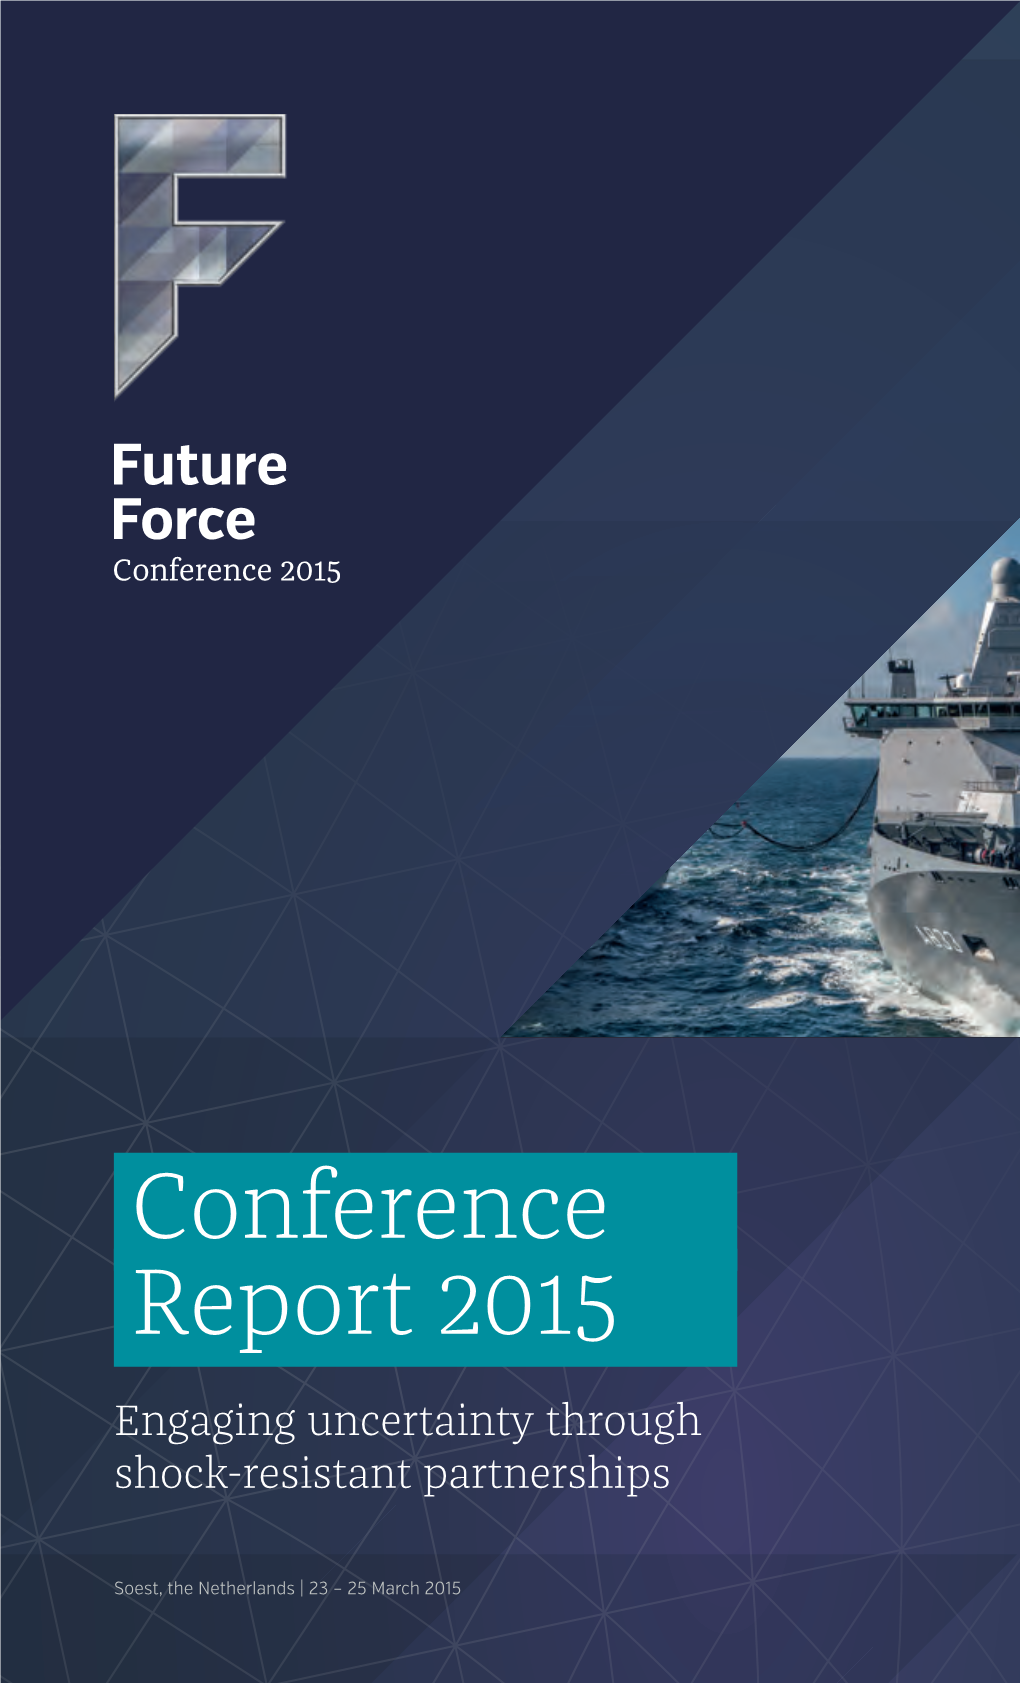 Future Force Conference Report 2015